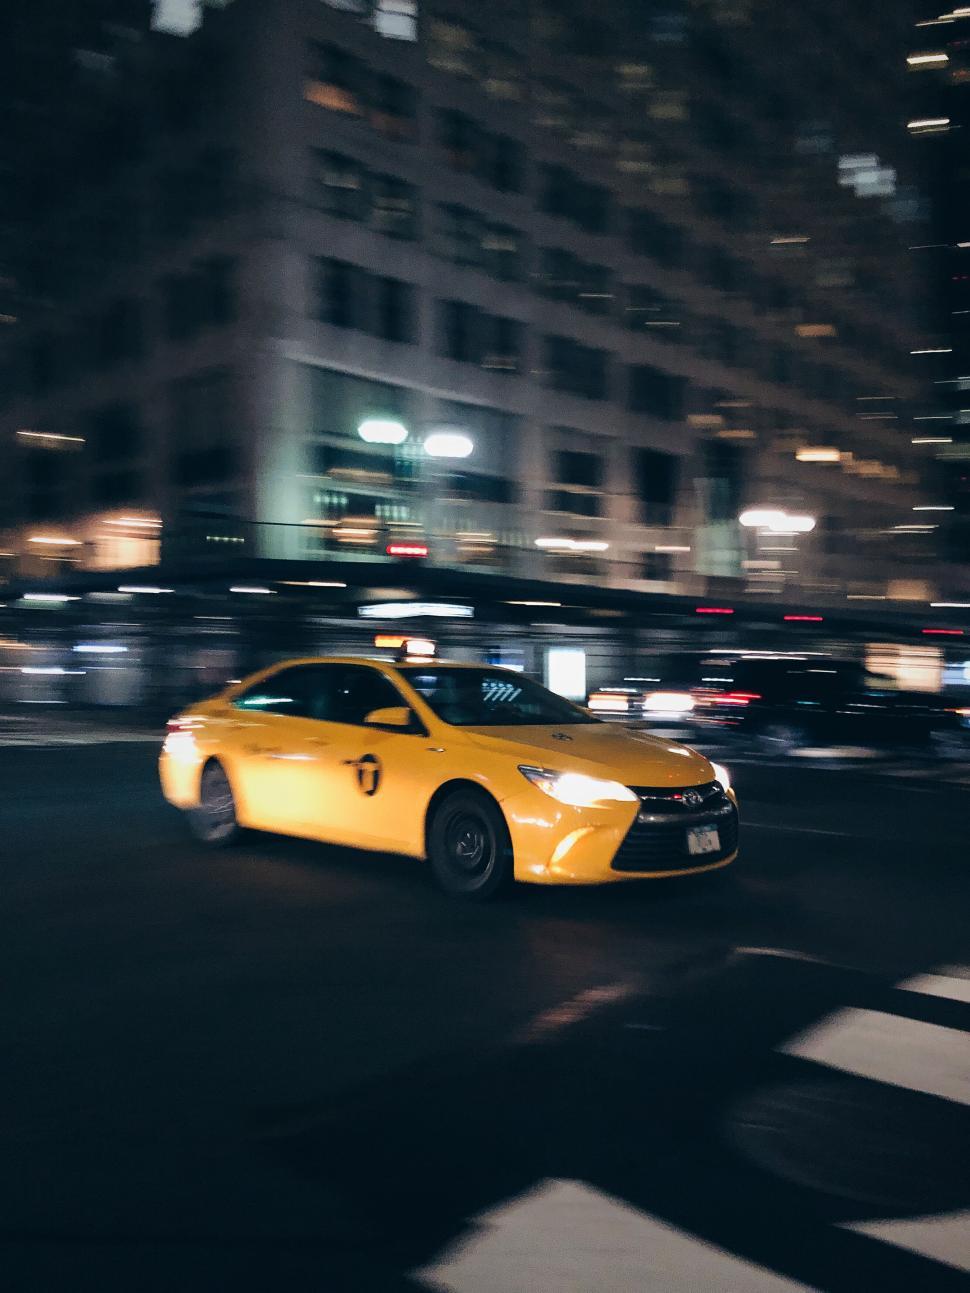 Free Image of Yellow taxi in motion on New York streets 